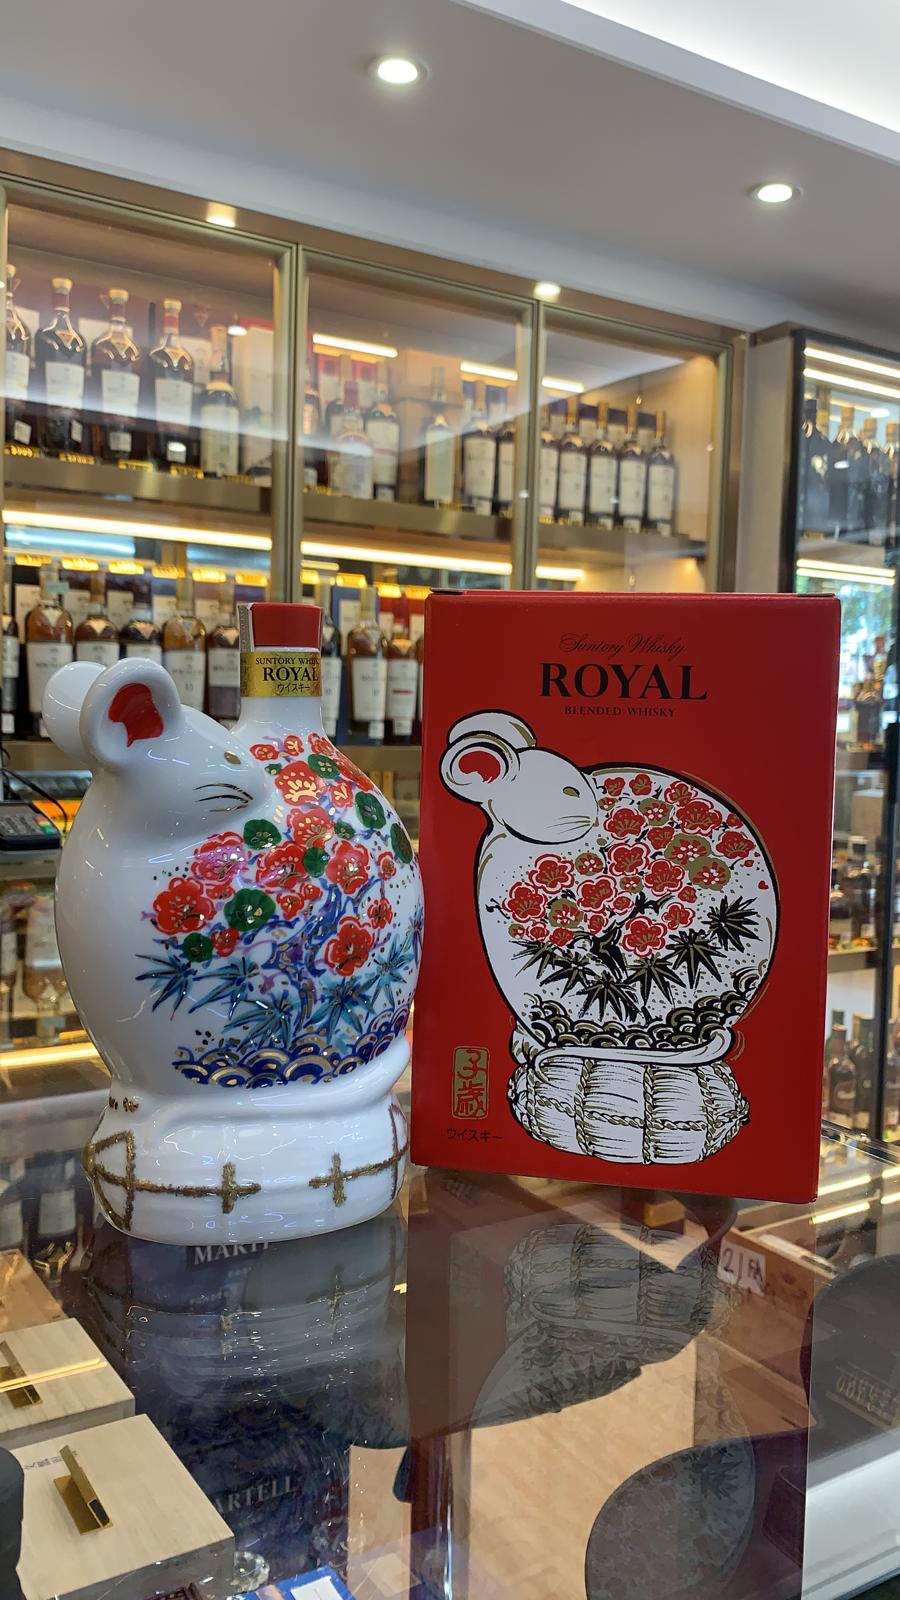 SUNTORY WHISKY ROYAL  YEAR OF THE RAT BOTTLE  2020 EDITION